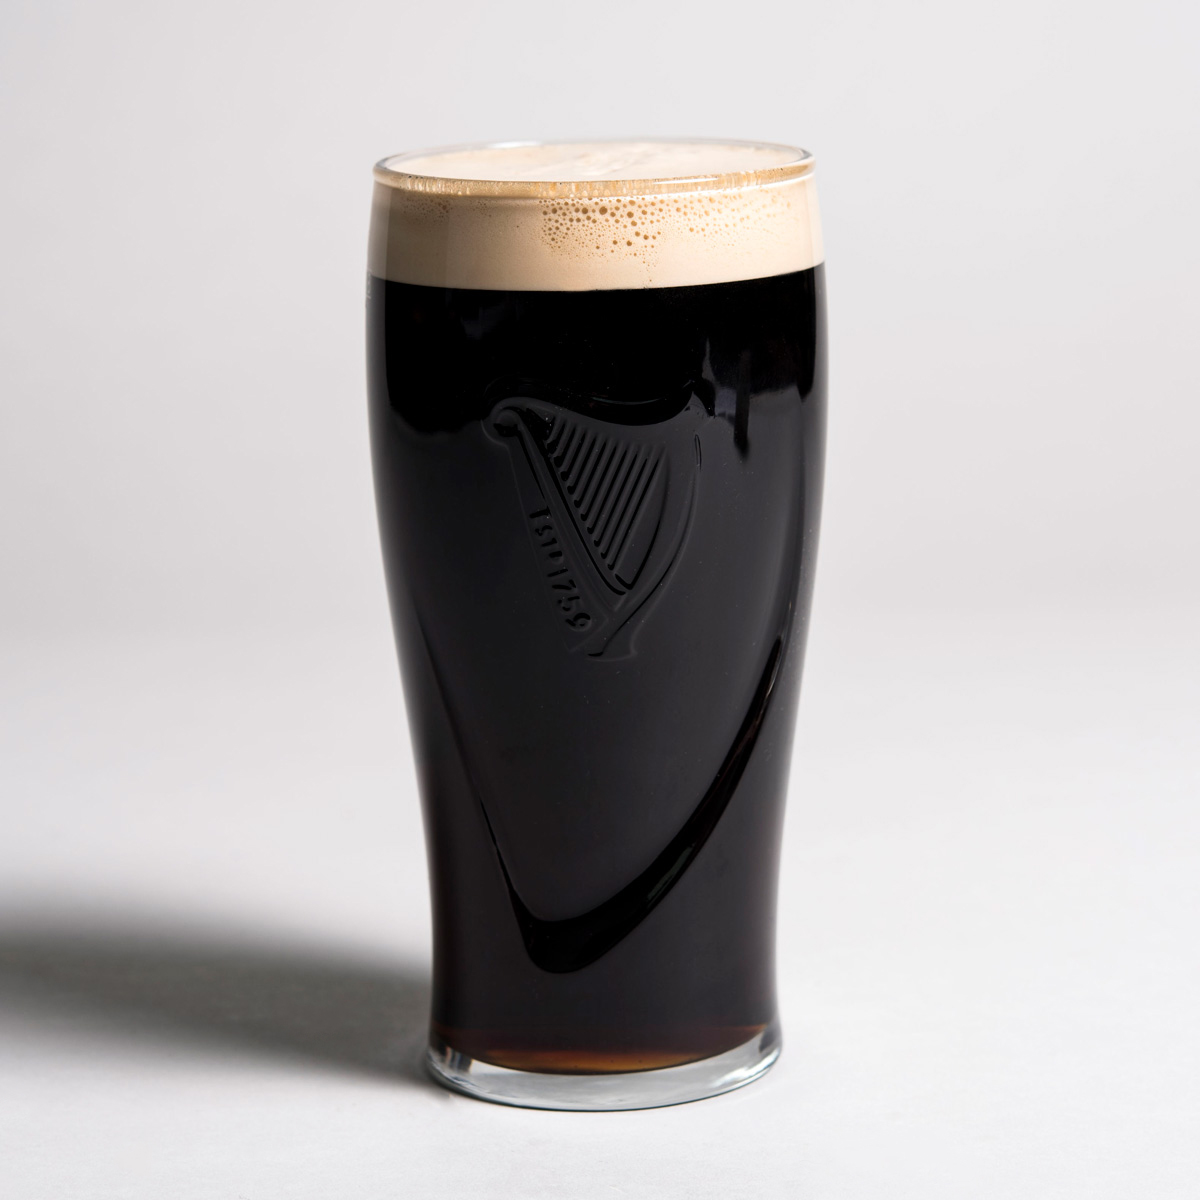 Personalised Guinness Pint Glass - For Your Best Man